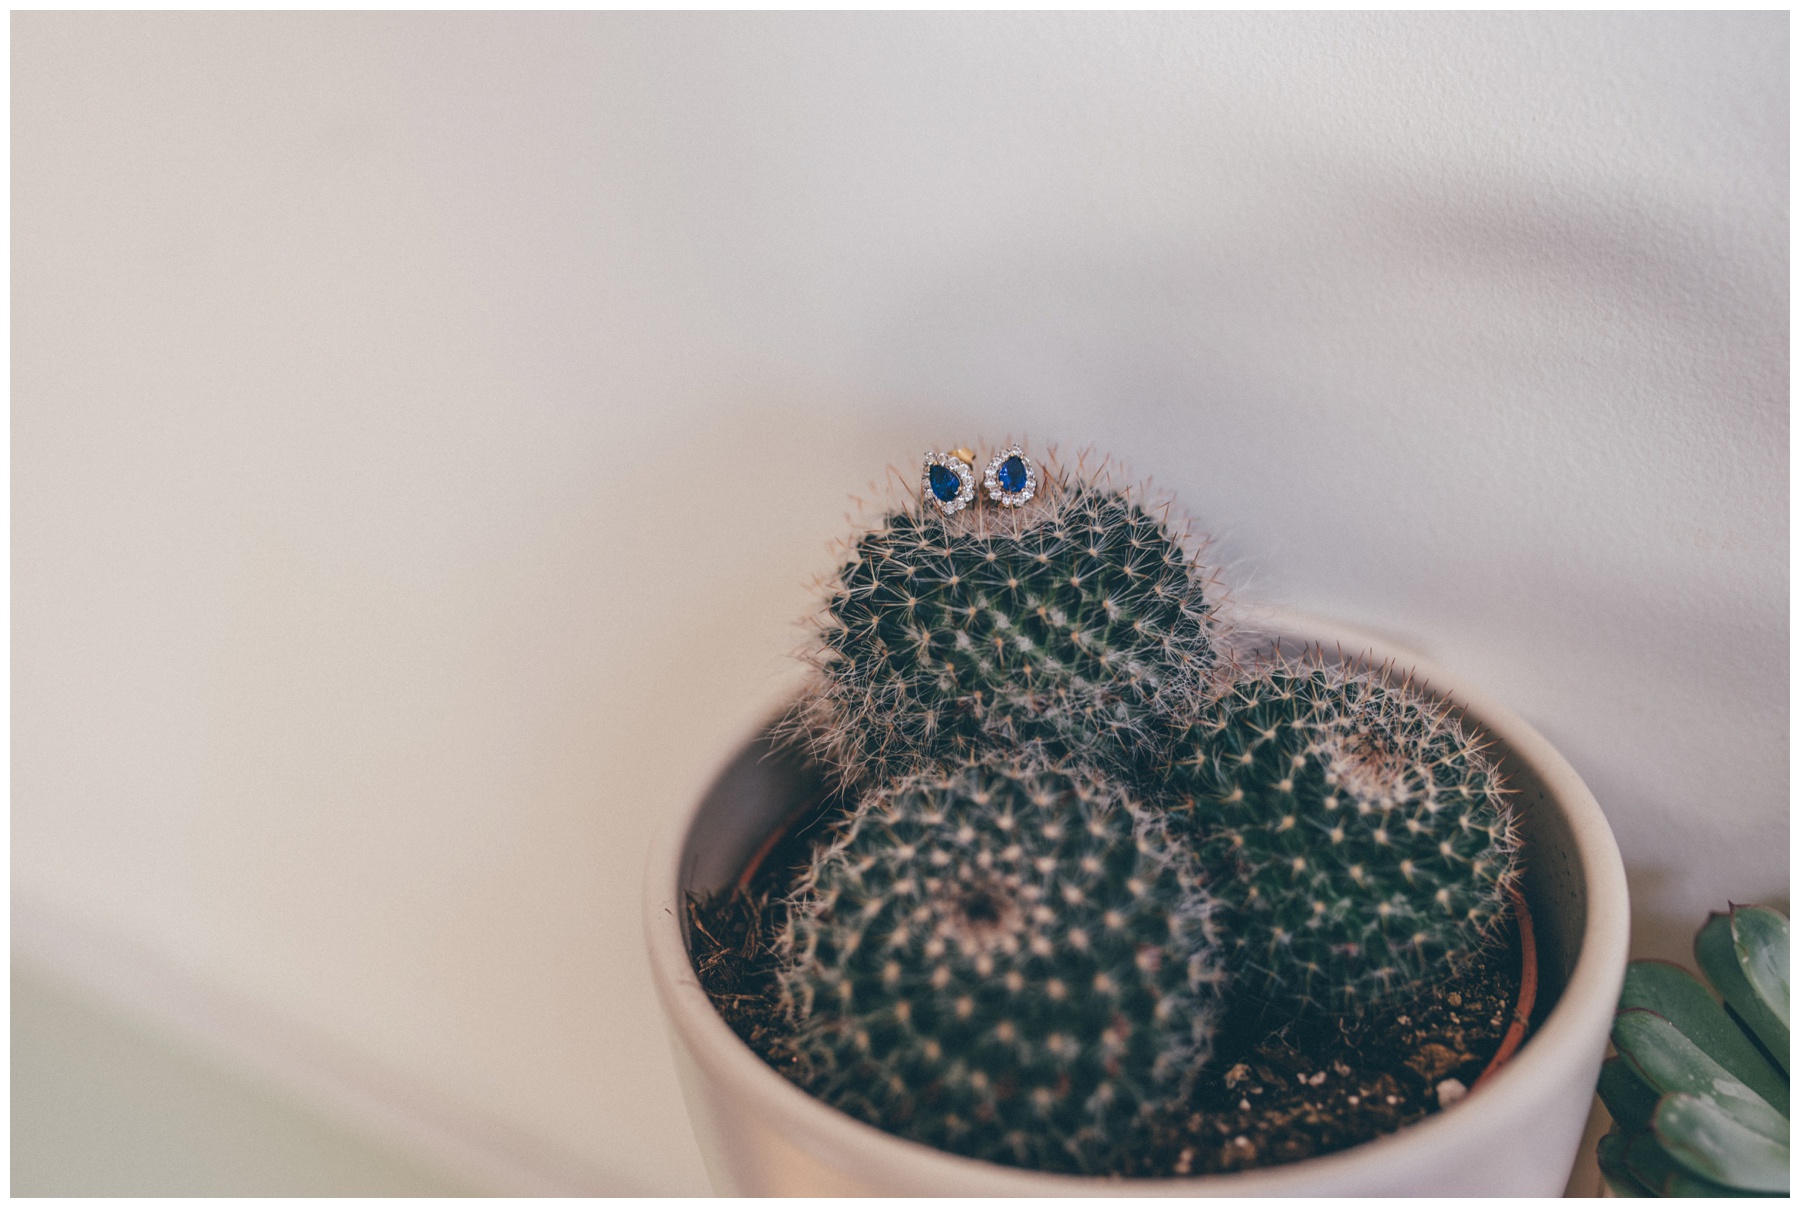 Stunning sapphire earrings surrounded by diamonds on a cactus.